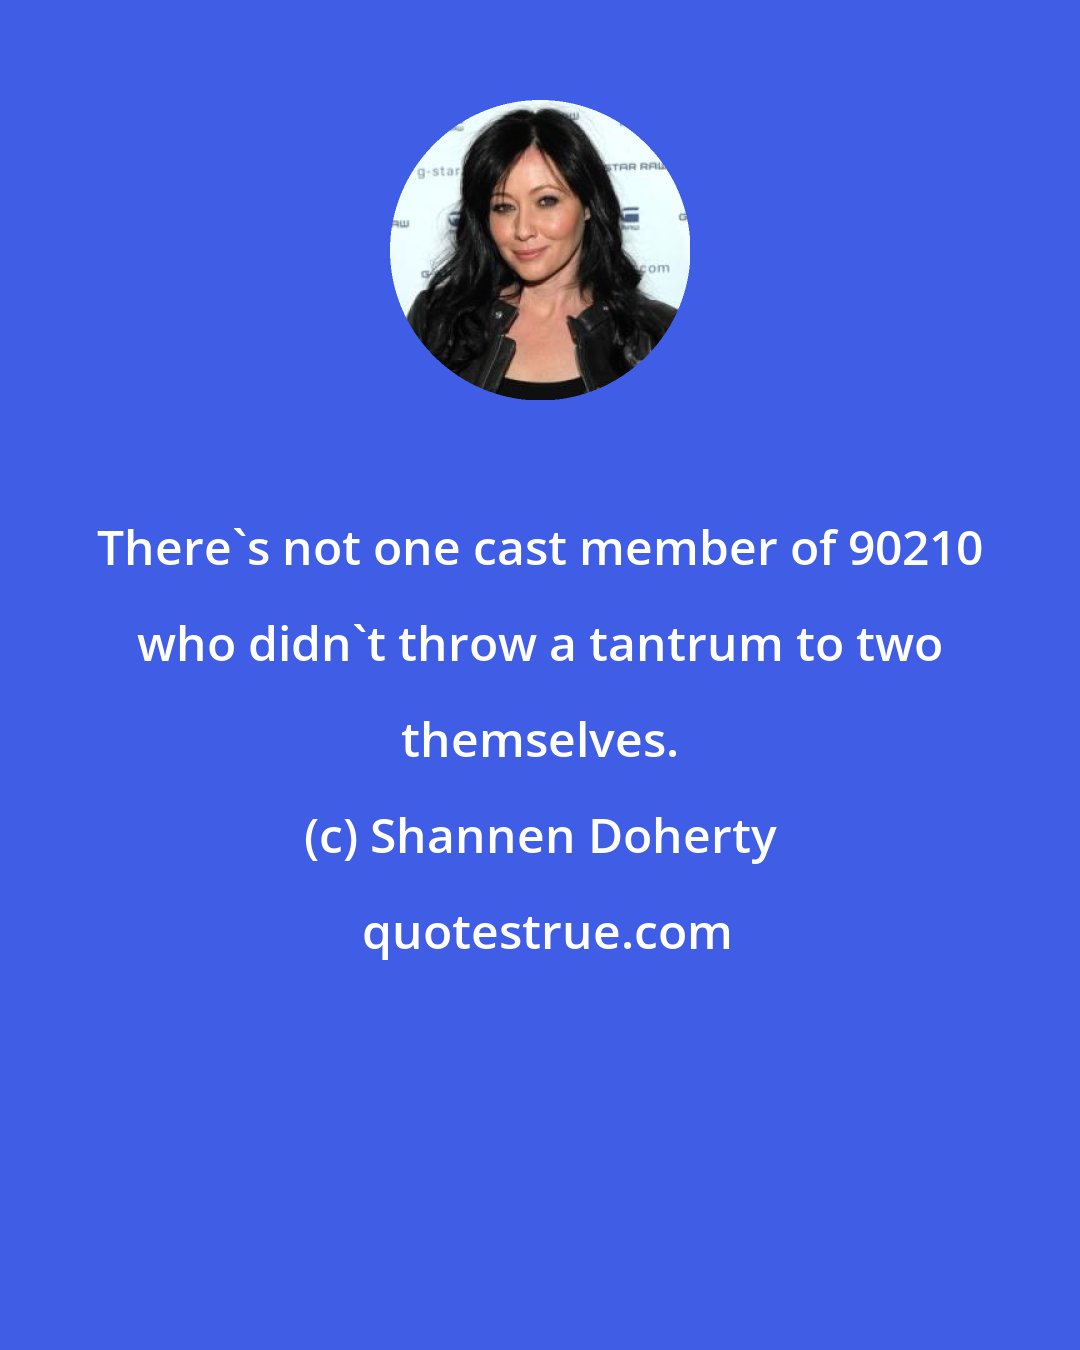 Shannen Doherty: There's not one cast member of 90210 who didn't throw a tantrum to two themselves.